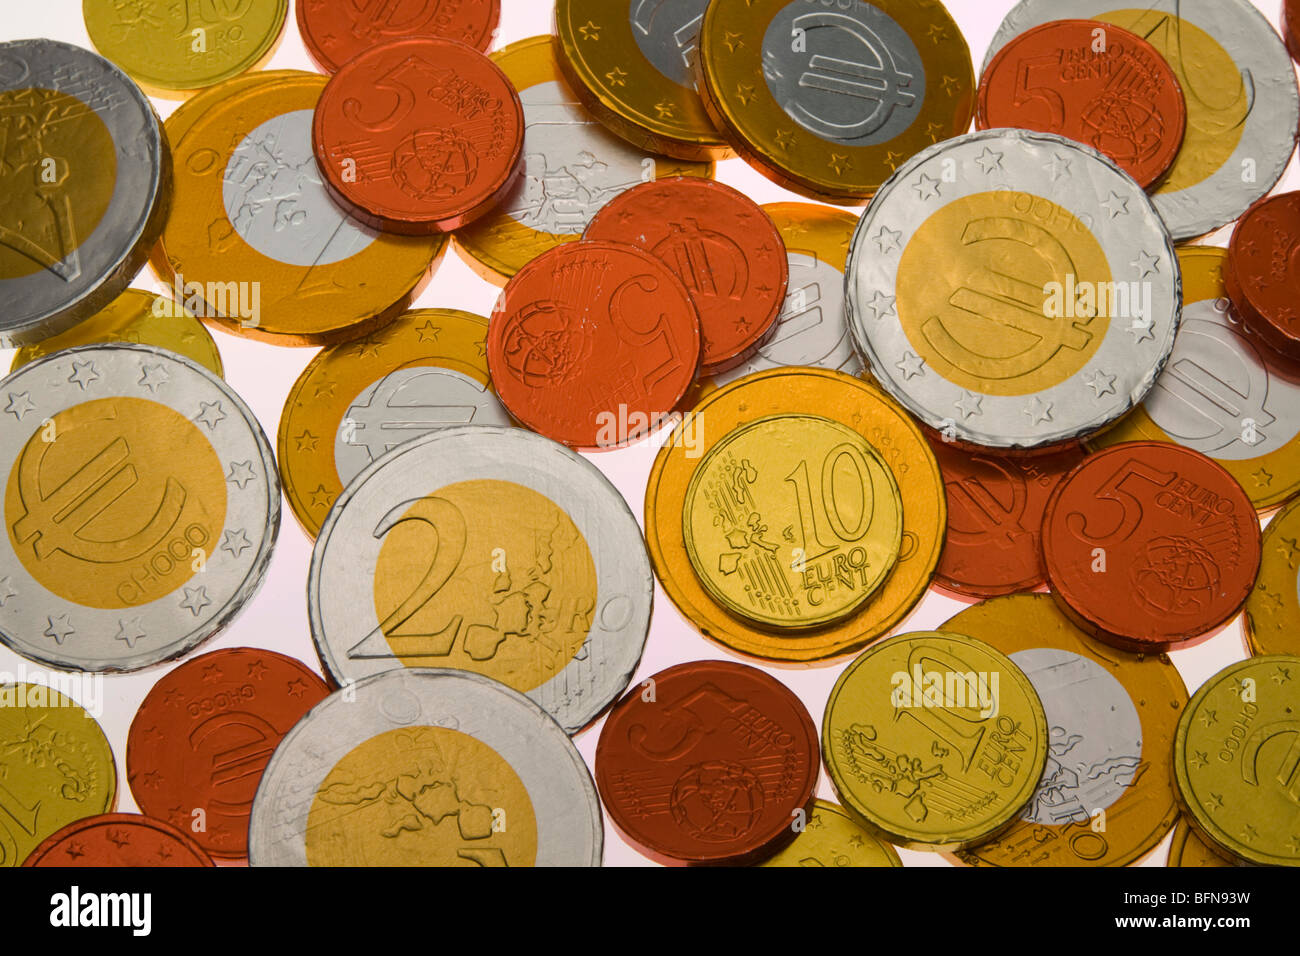 Chocolate coins for Christmas stockings - Euros instead of pounds and pennies Stock Photo